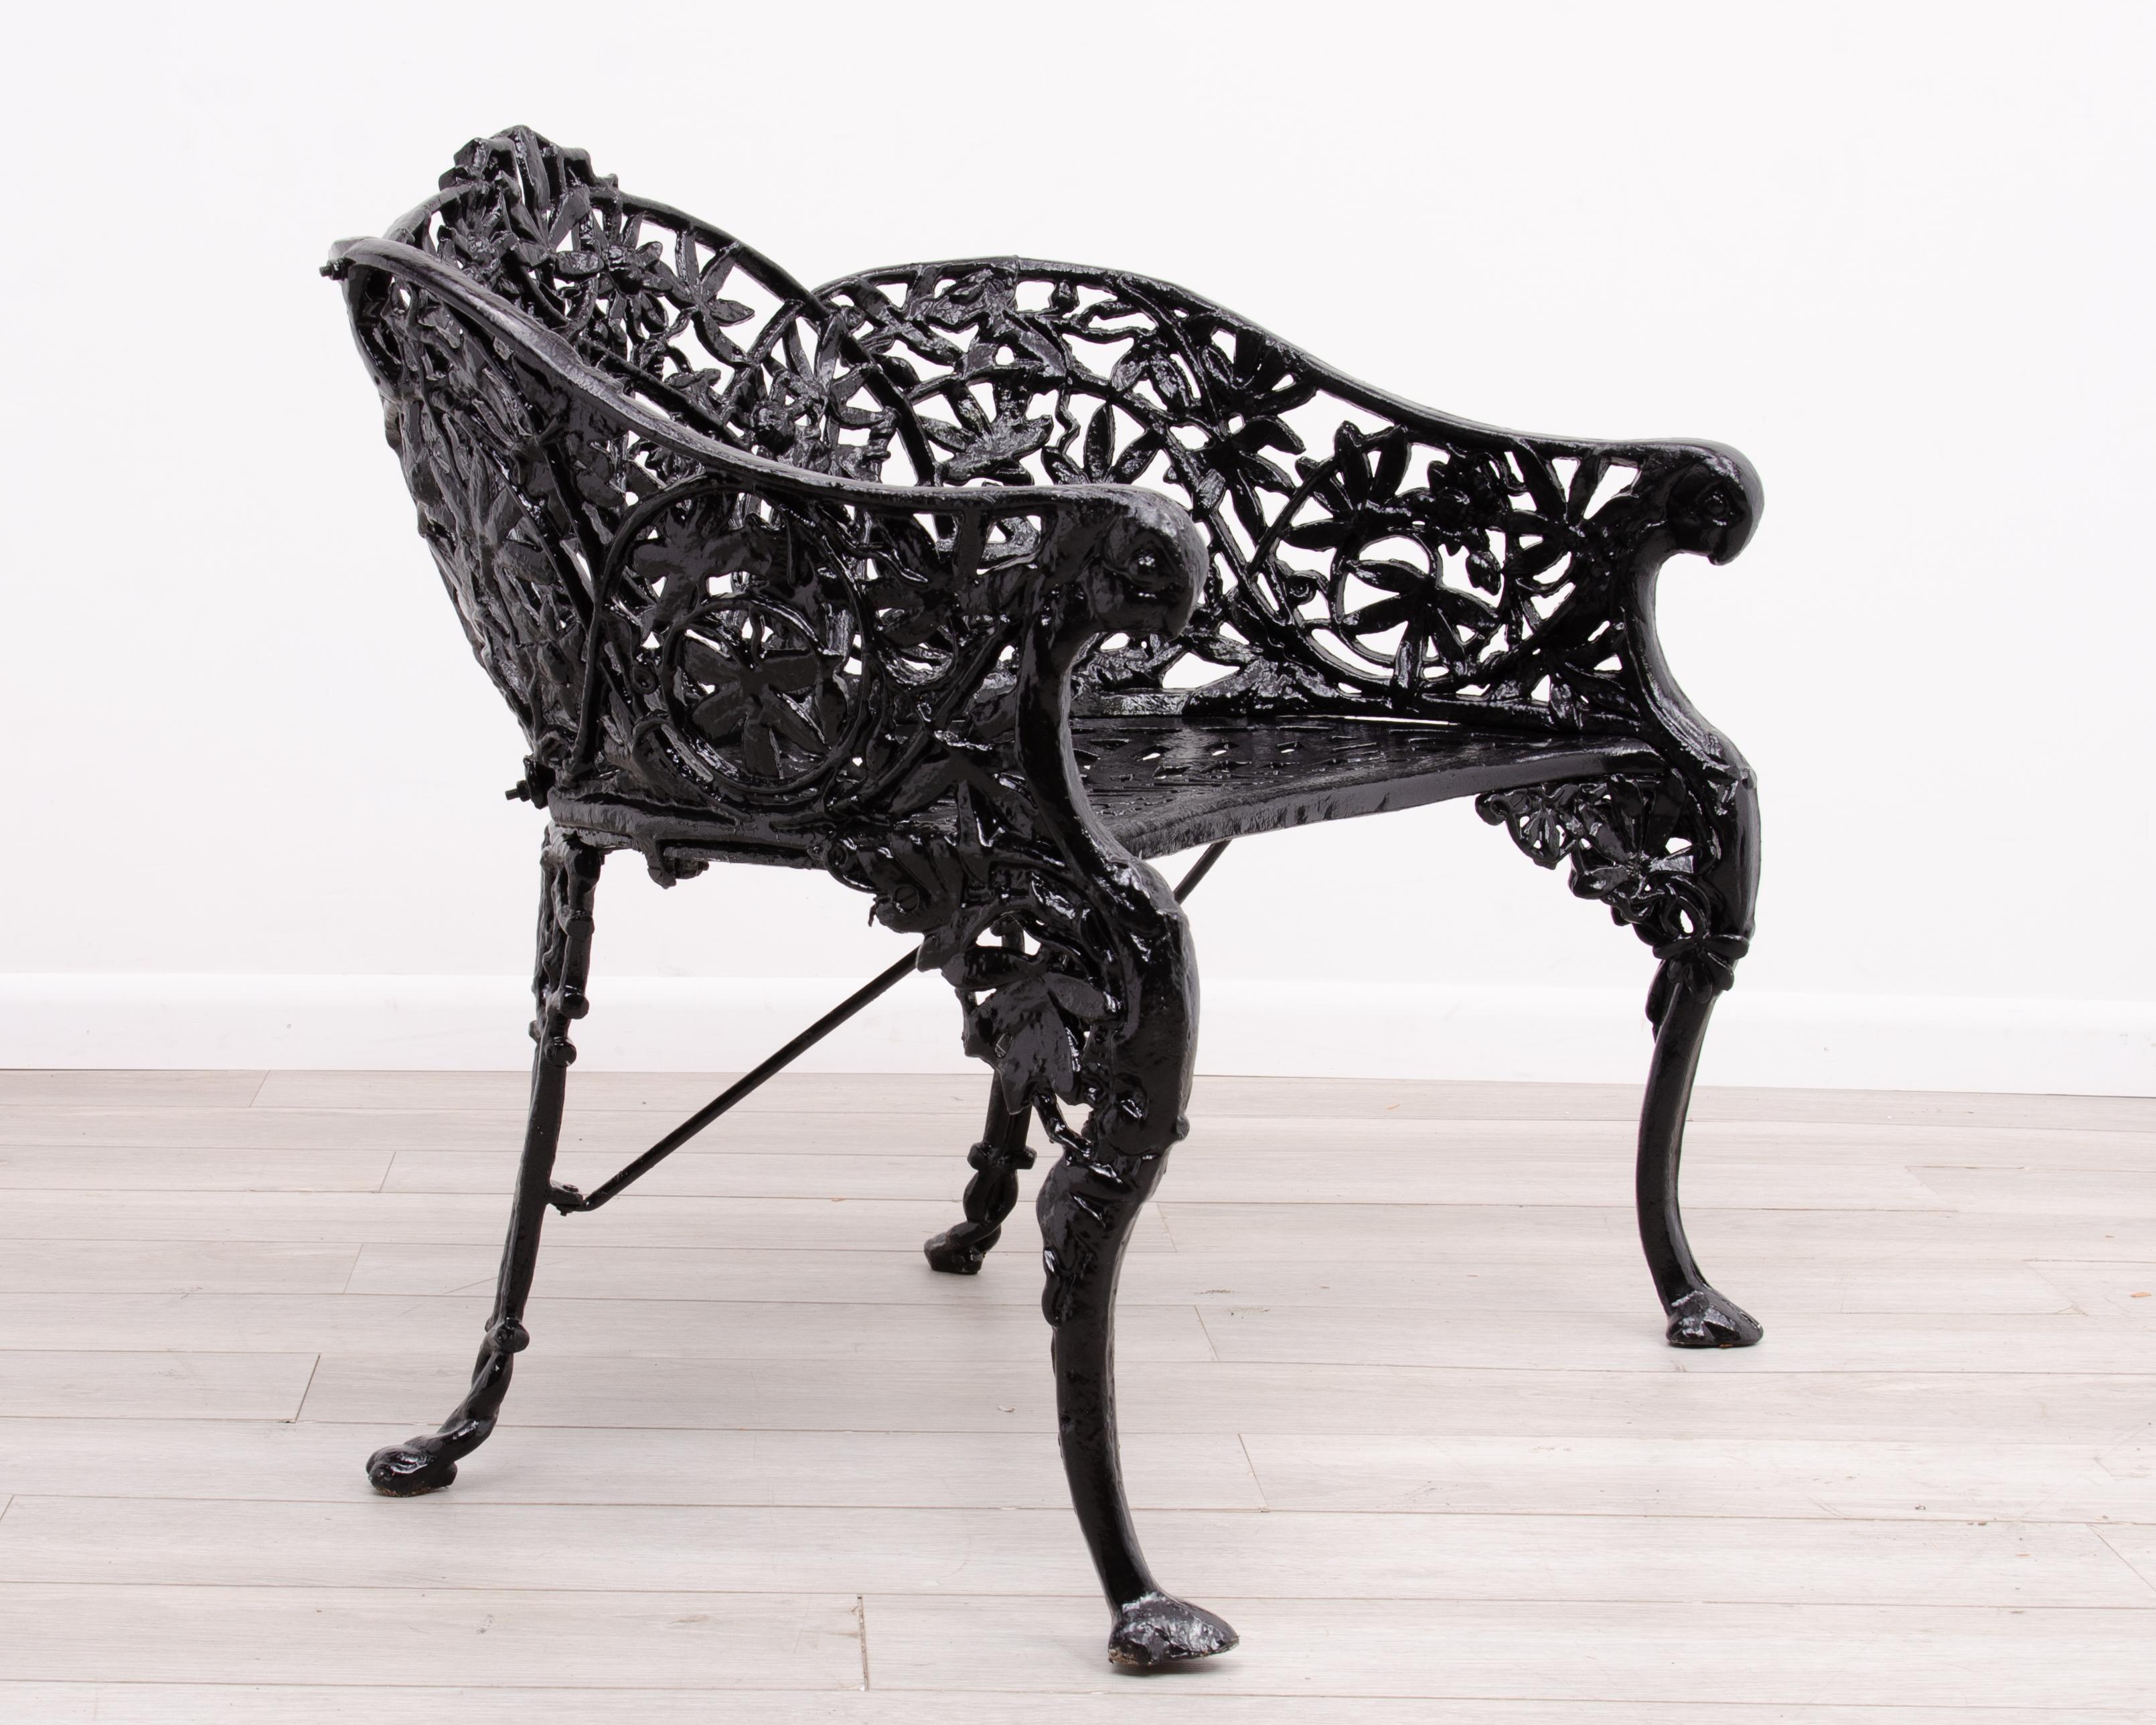 A rare Cast Iron Bench in the elaborate Passion Flower Pattern. This early botanical design originated in England and was registered in 1862 by the Coalbrookdale Company and was then copied by American foundries. The seat features scrolling curved